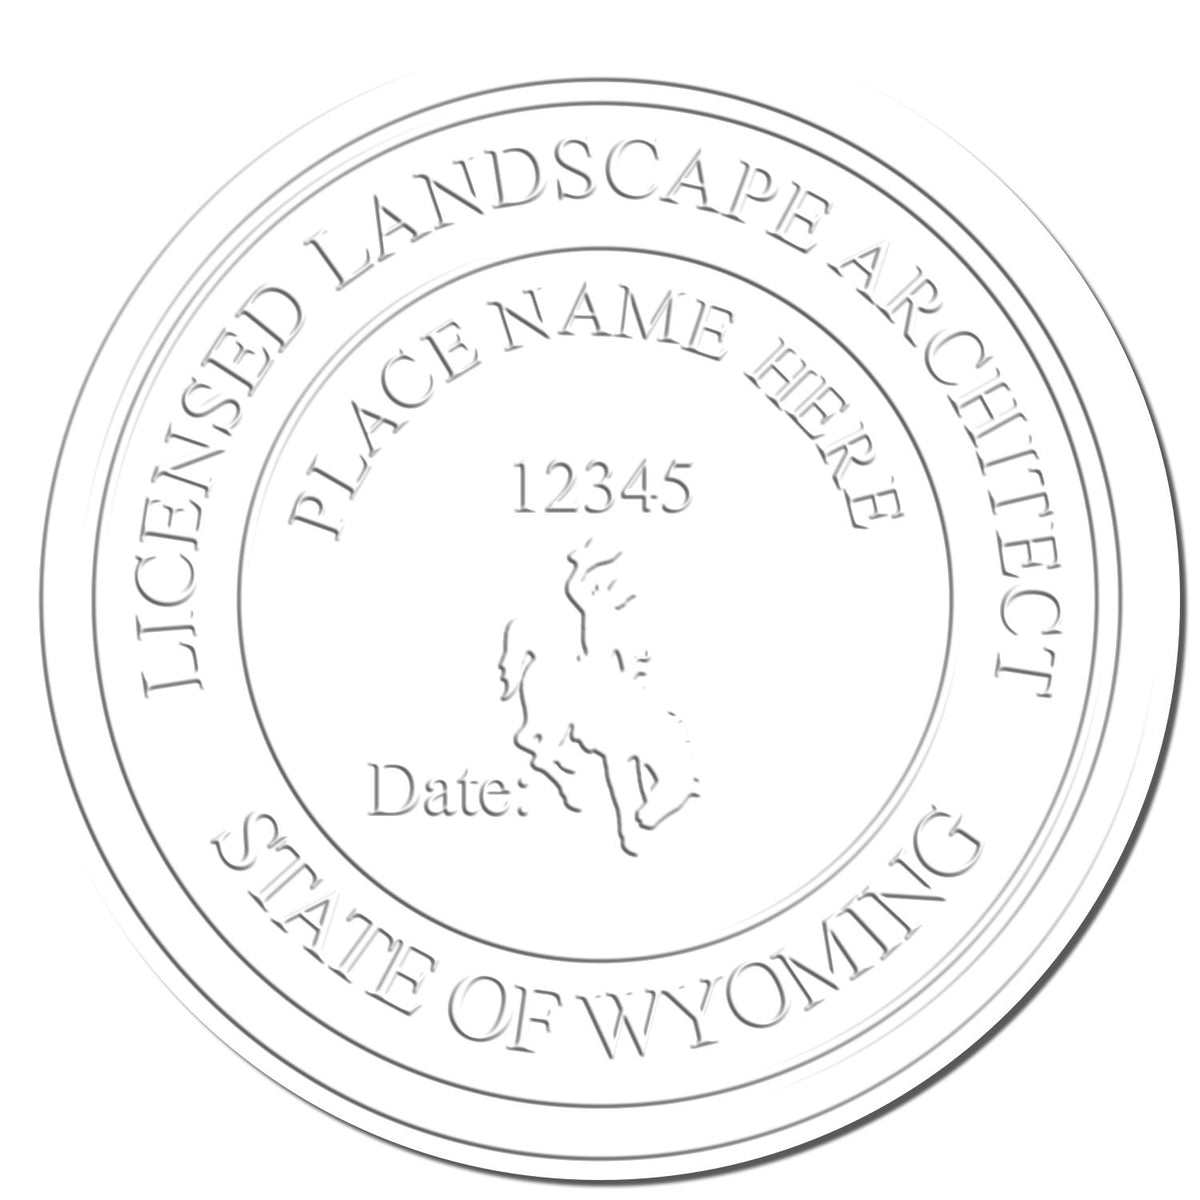 This paper is stamped with a sample imprint of the Hybrid Wyoming Landscape Architect Seal, signifying its quality and reliability.